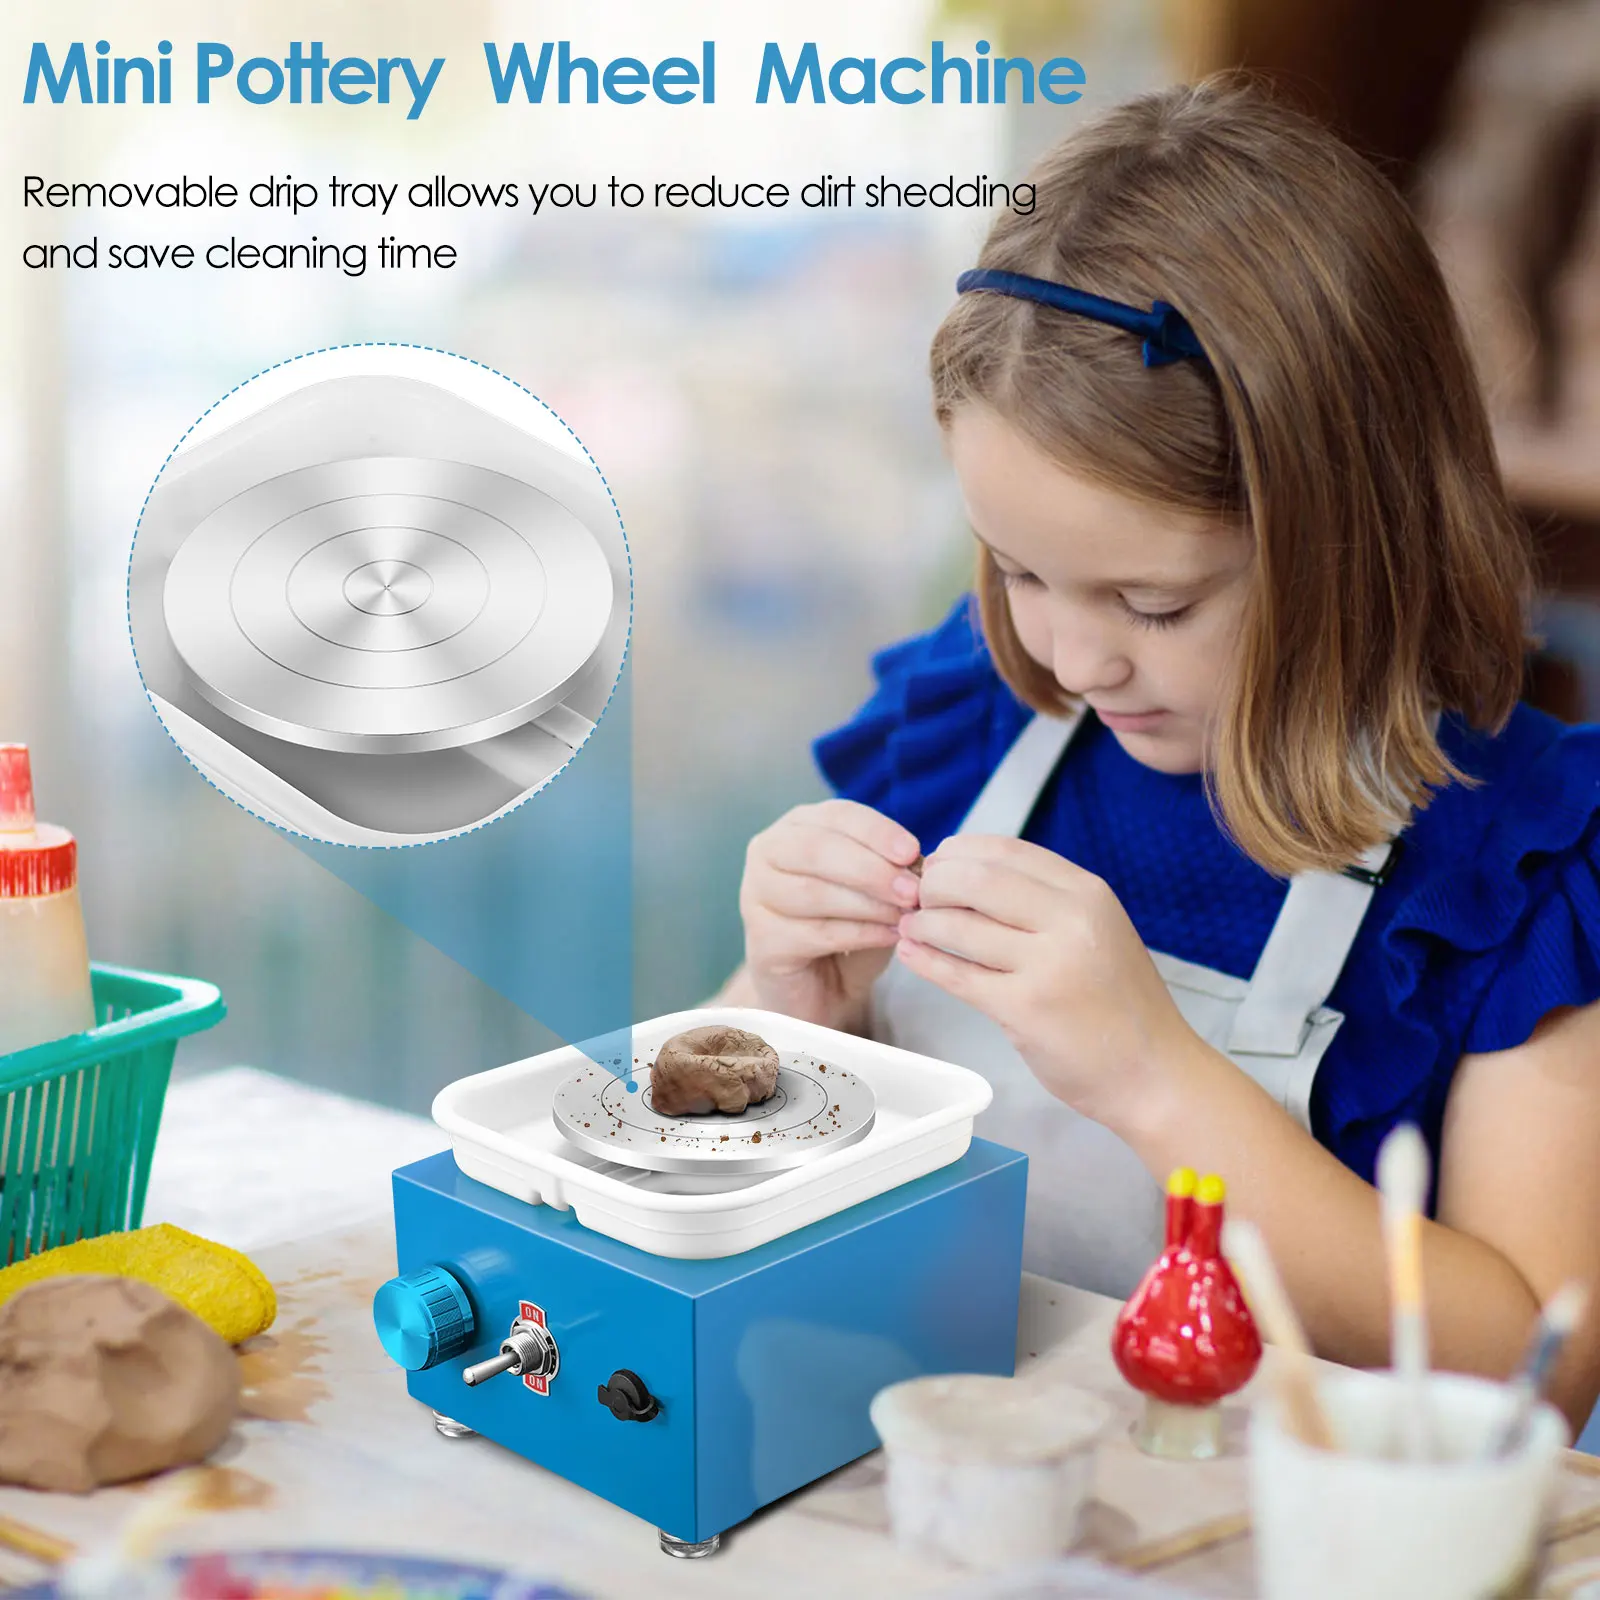 Kid's Pottery Wheel,30W Mini Pottery Wheel Plug-in Motor Pottery Kit for  Beginners Pottery Wheel for Kids with Clay Tools for Home Use,School,Art  Room